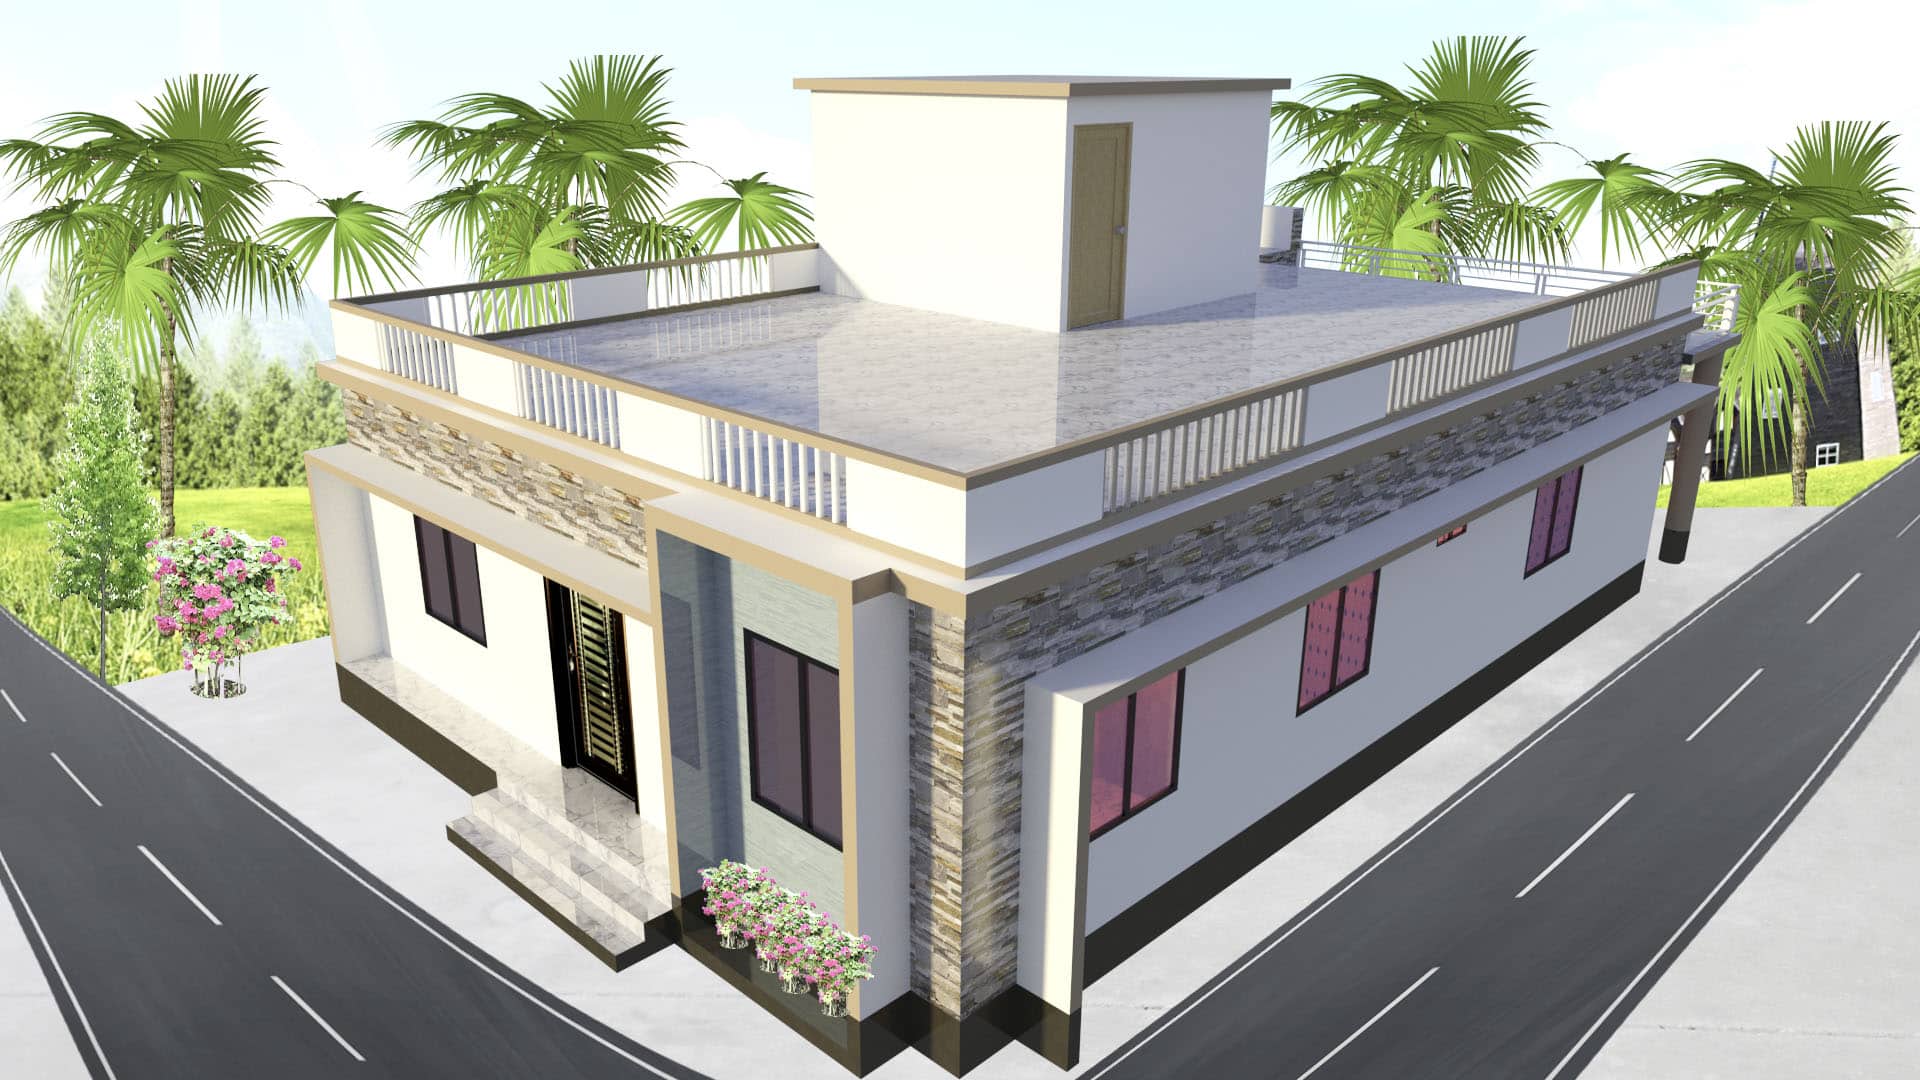 3 BHK House Design and Plan